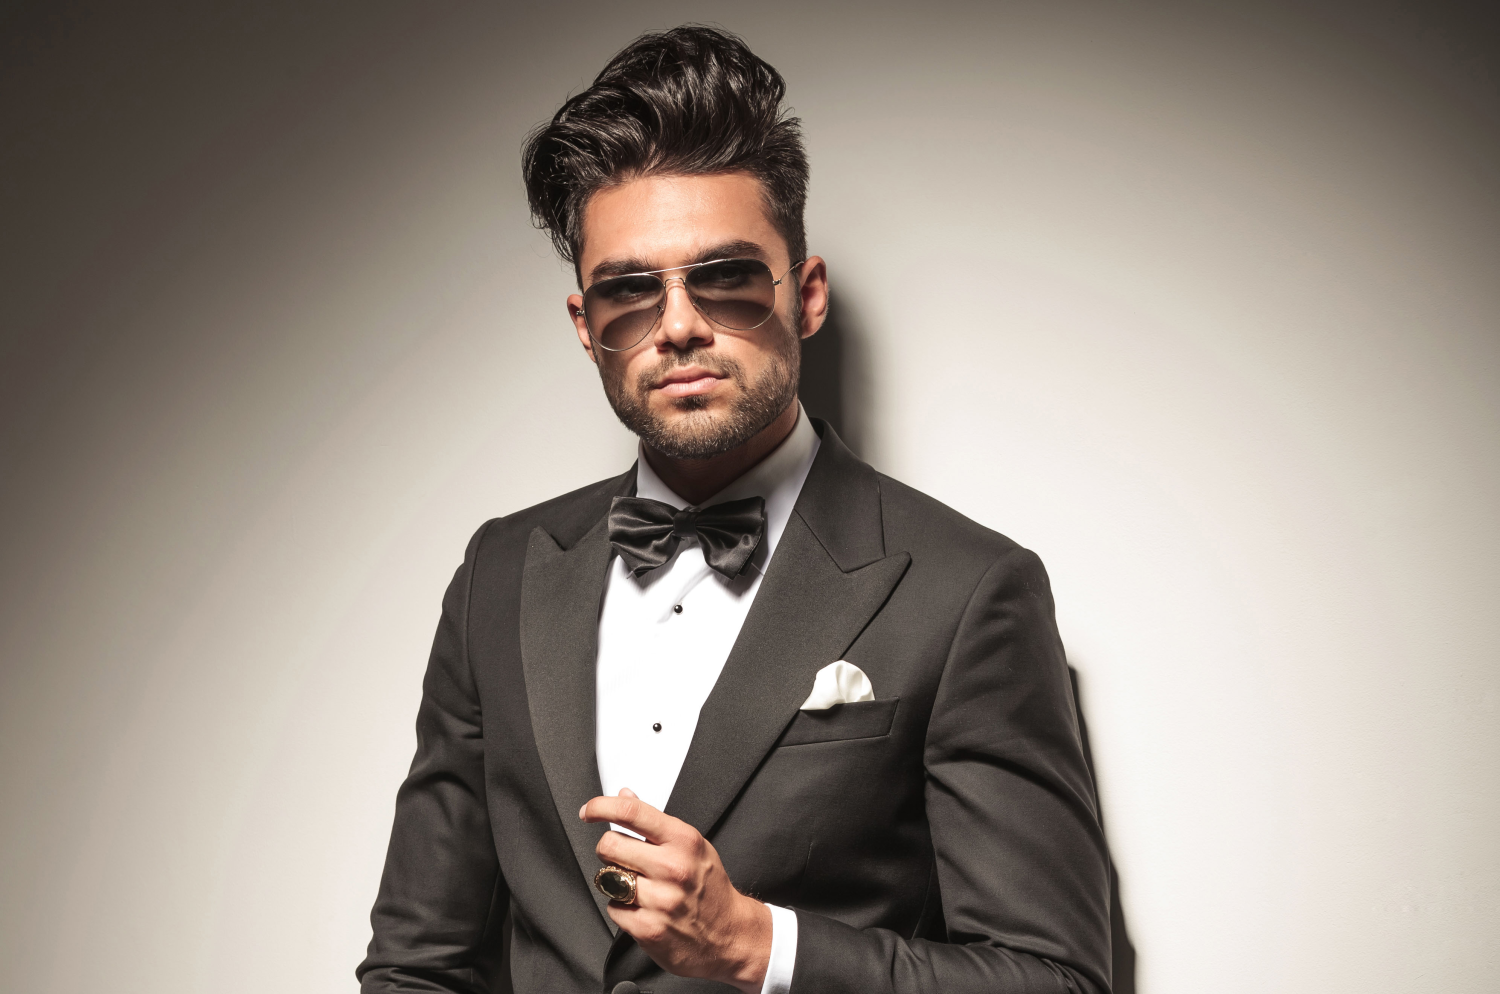 The 5 most popular men's hairstyles right now, according to Pinterest |  Business Insider India